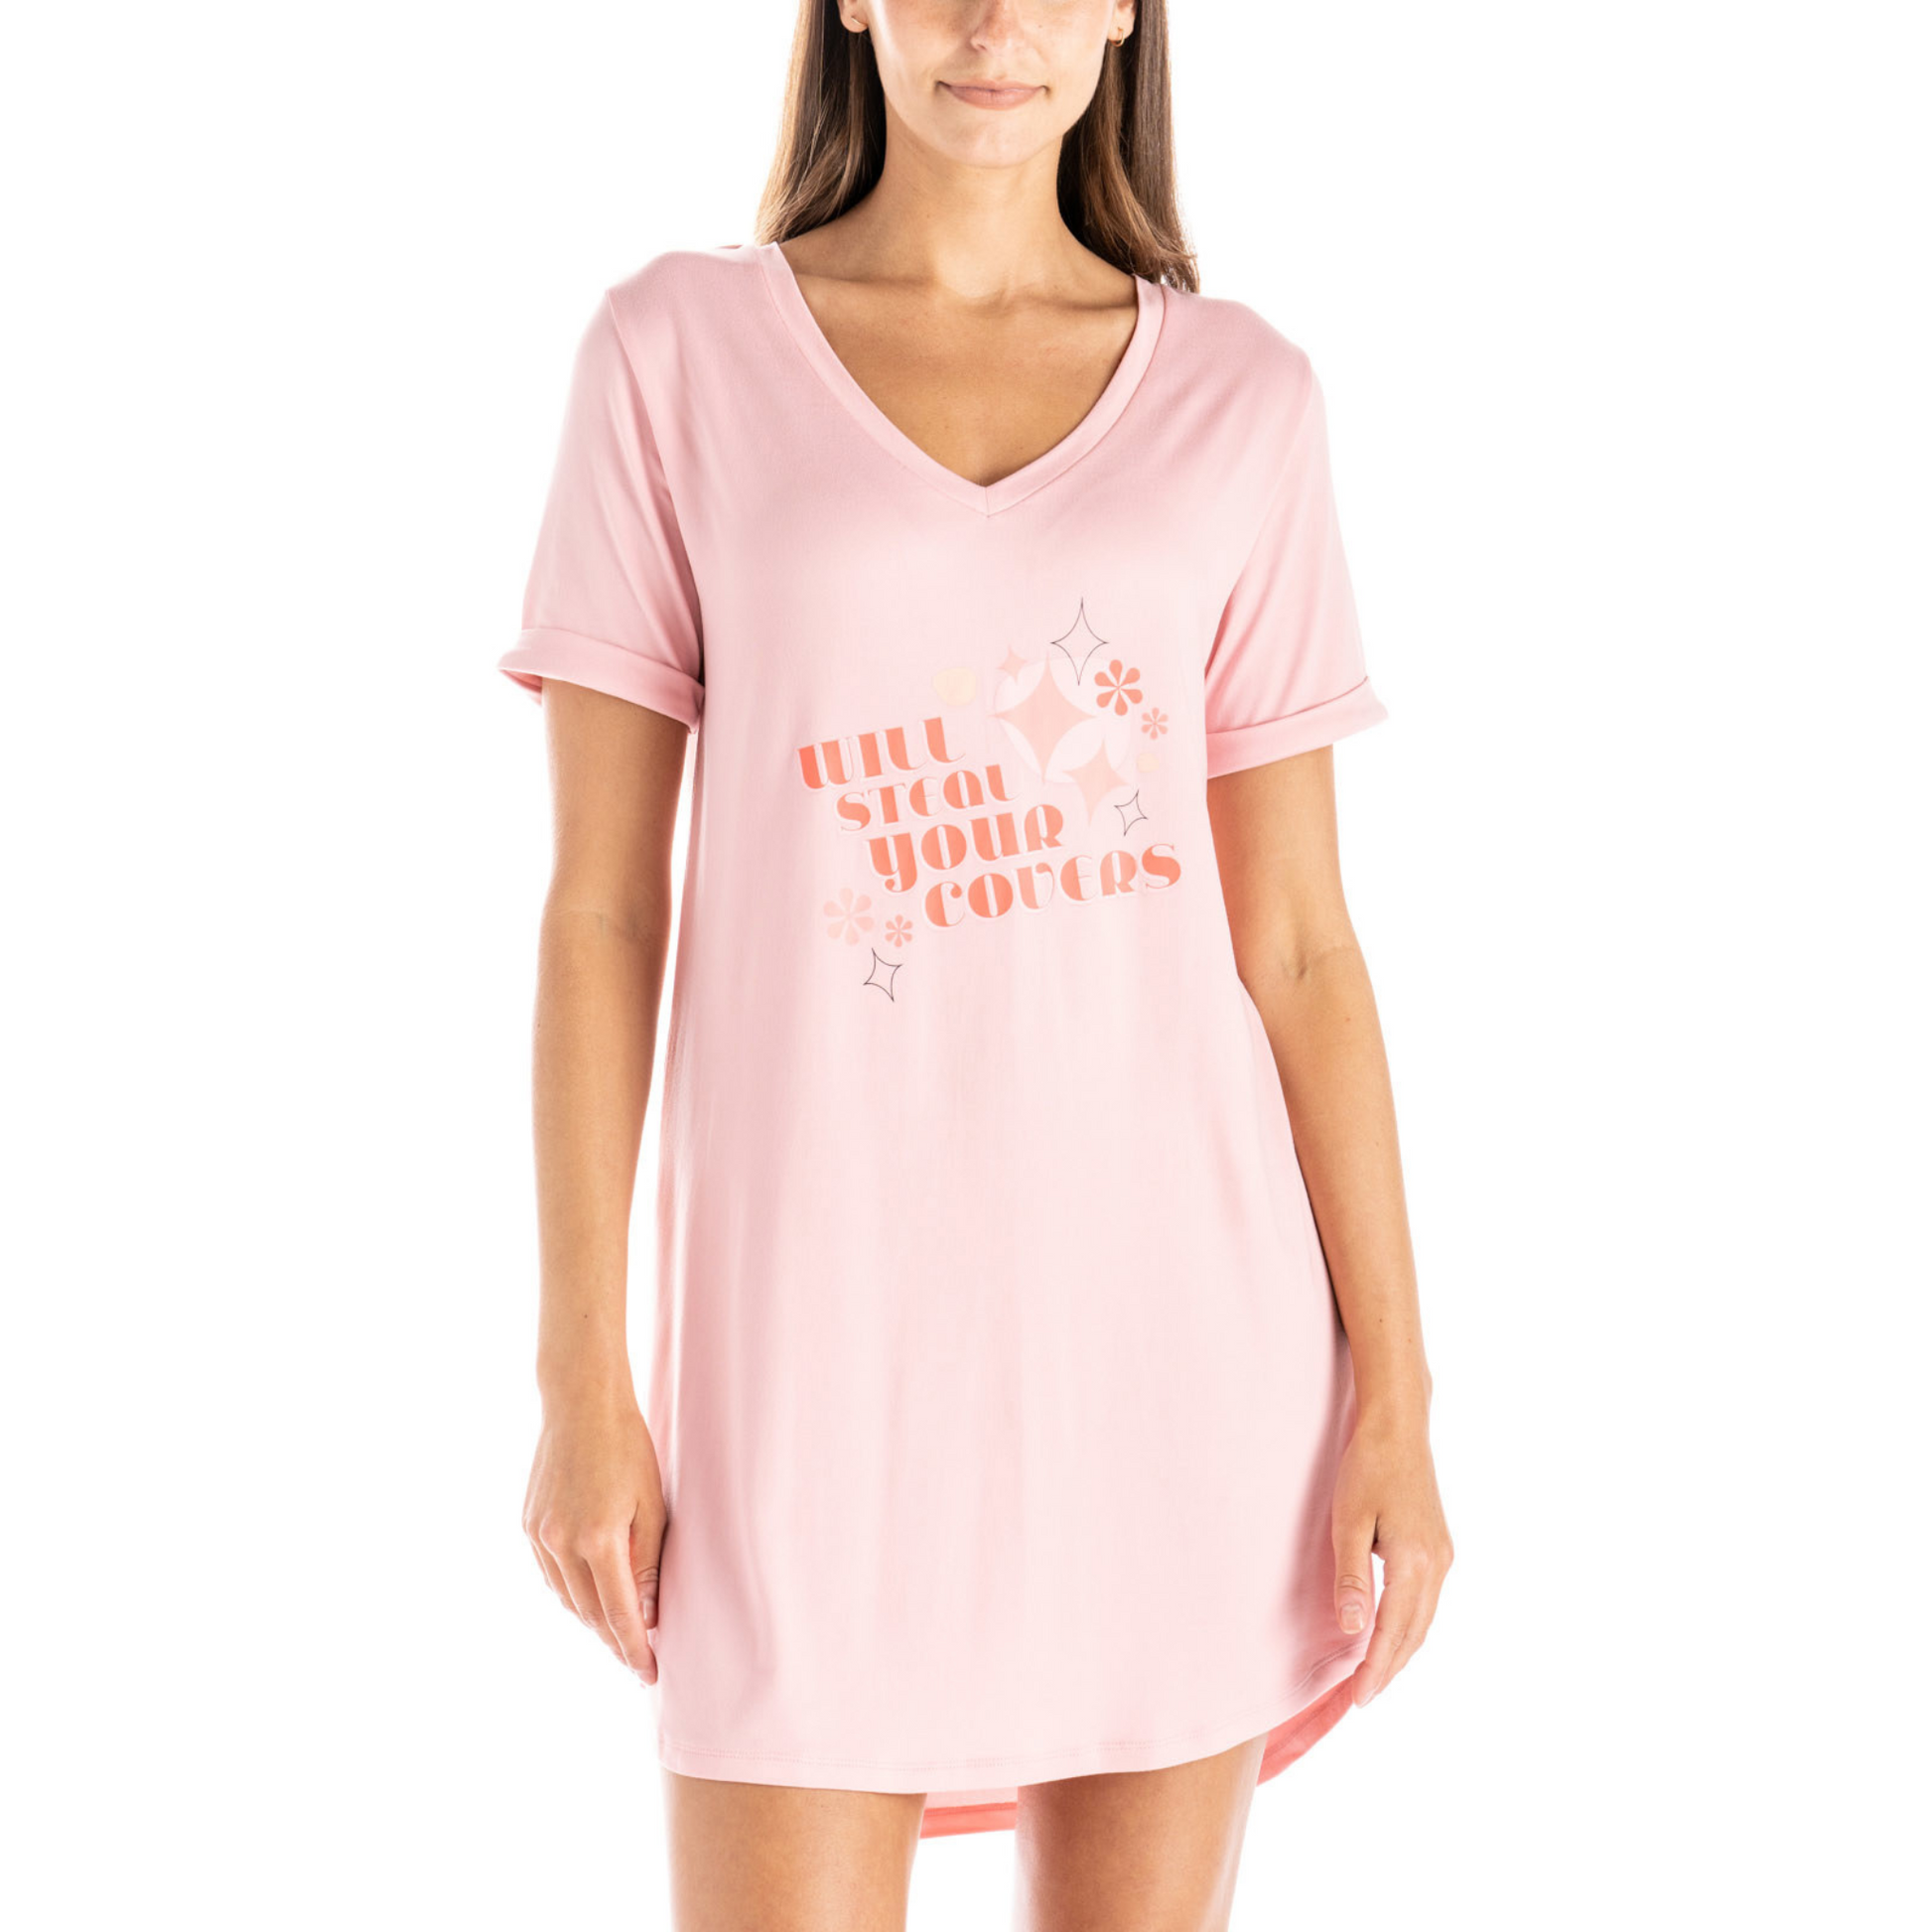 "I'll steal your covers" super soft pink sleepshirt